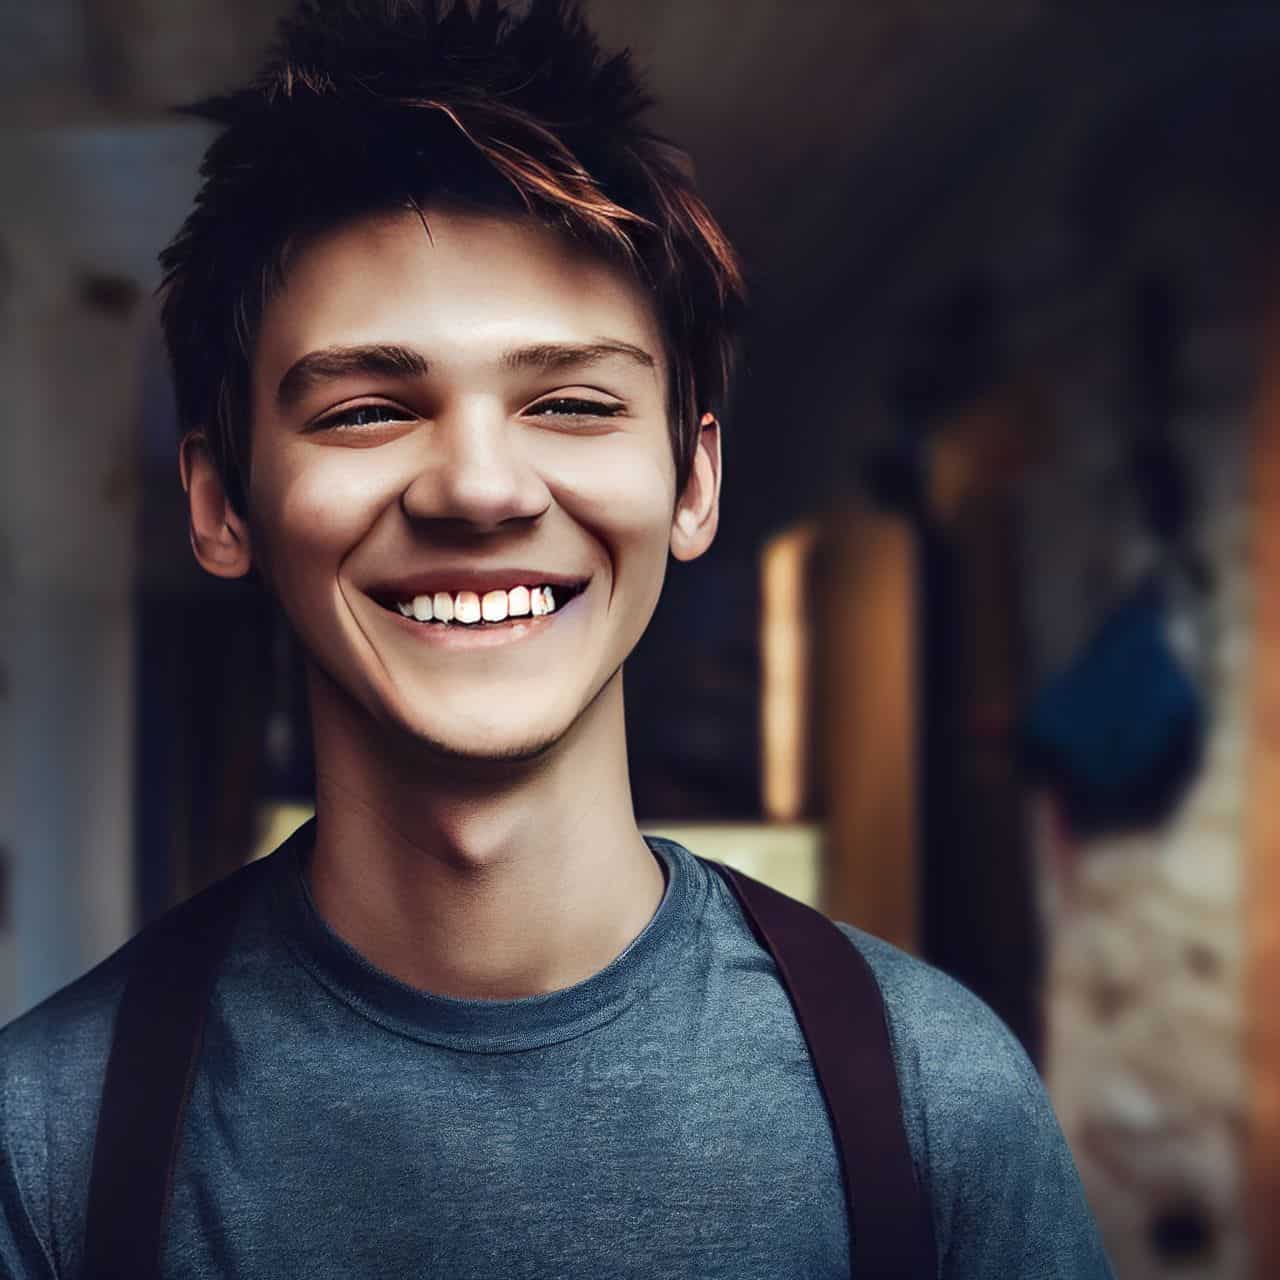 young man smiling with creepy eyes